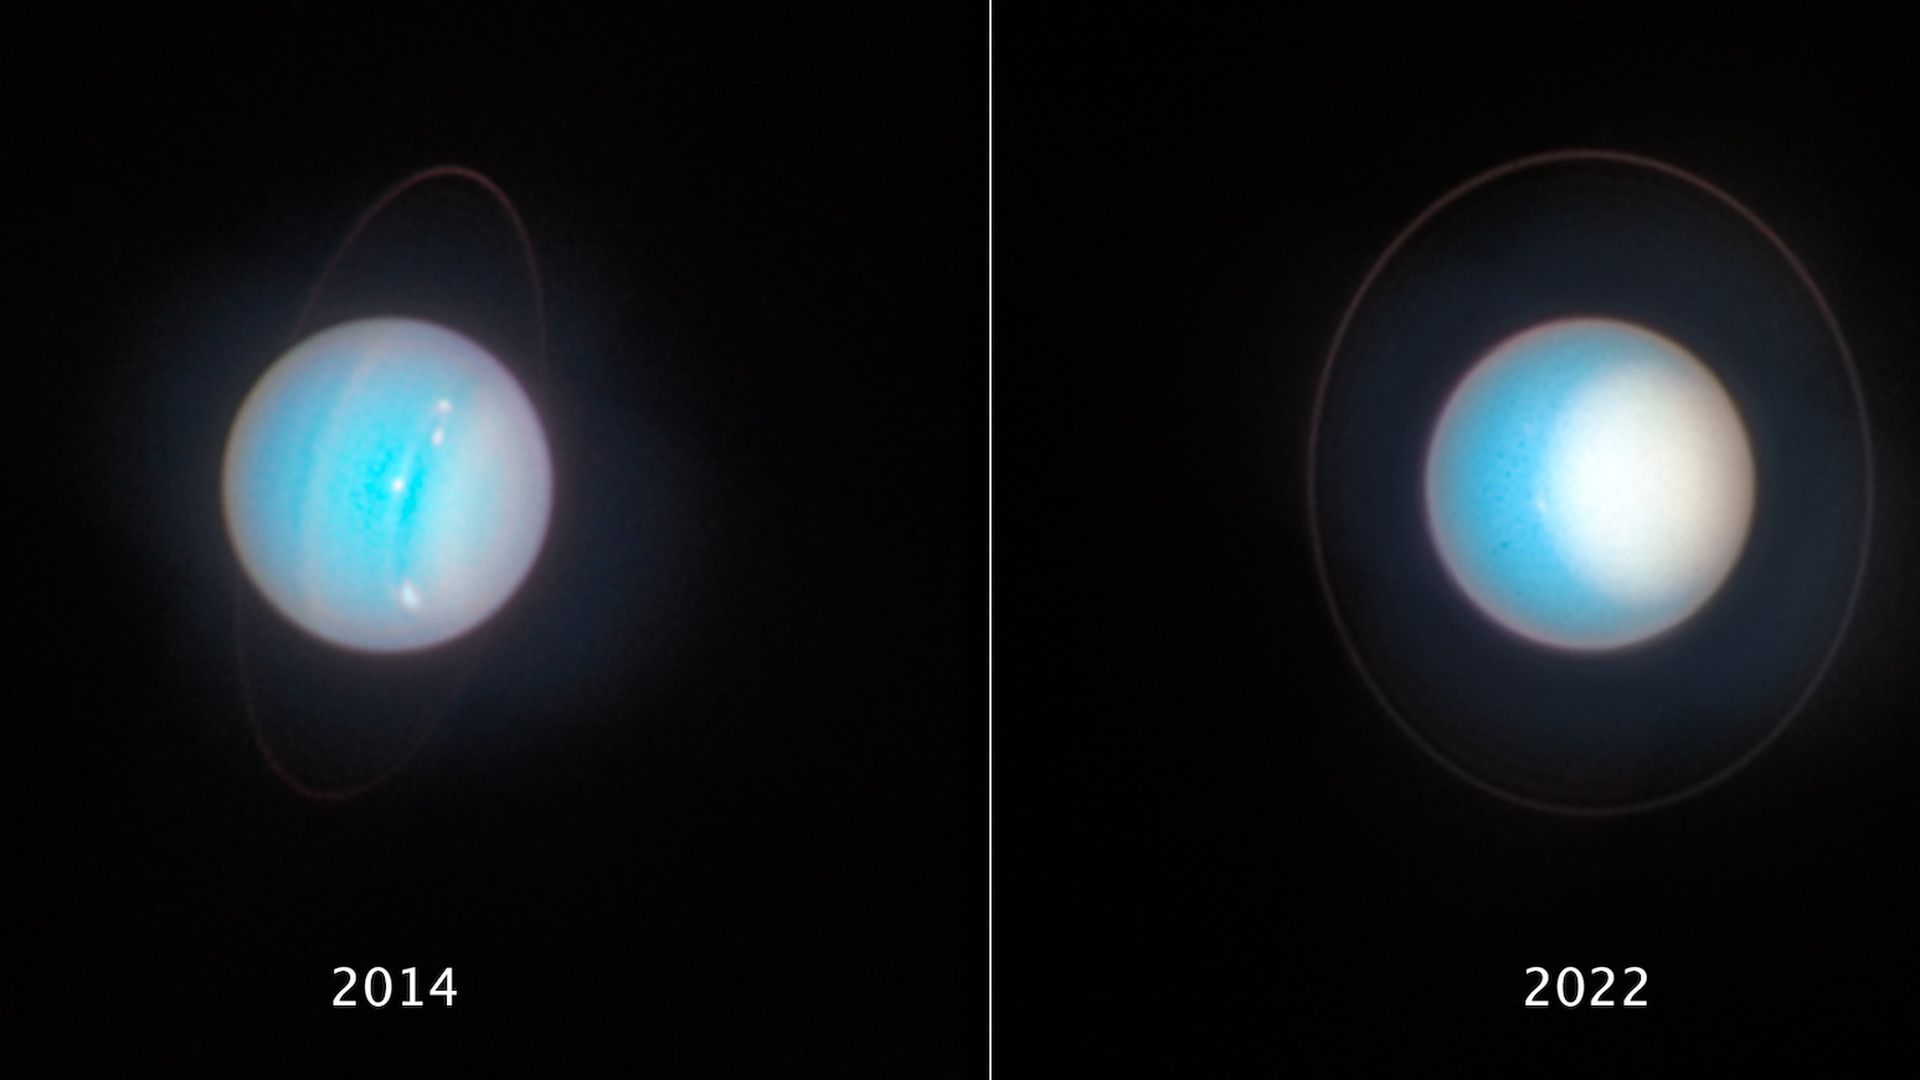 Two views of Uranus from the Hubble Space Telescope. One was taken in 2014, the other in 2022 showing that the planet's north pole has gotten brighter since 2014